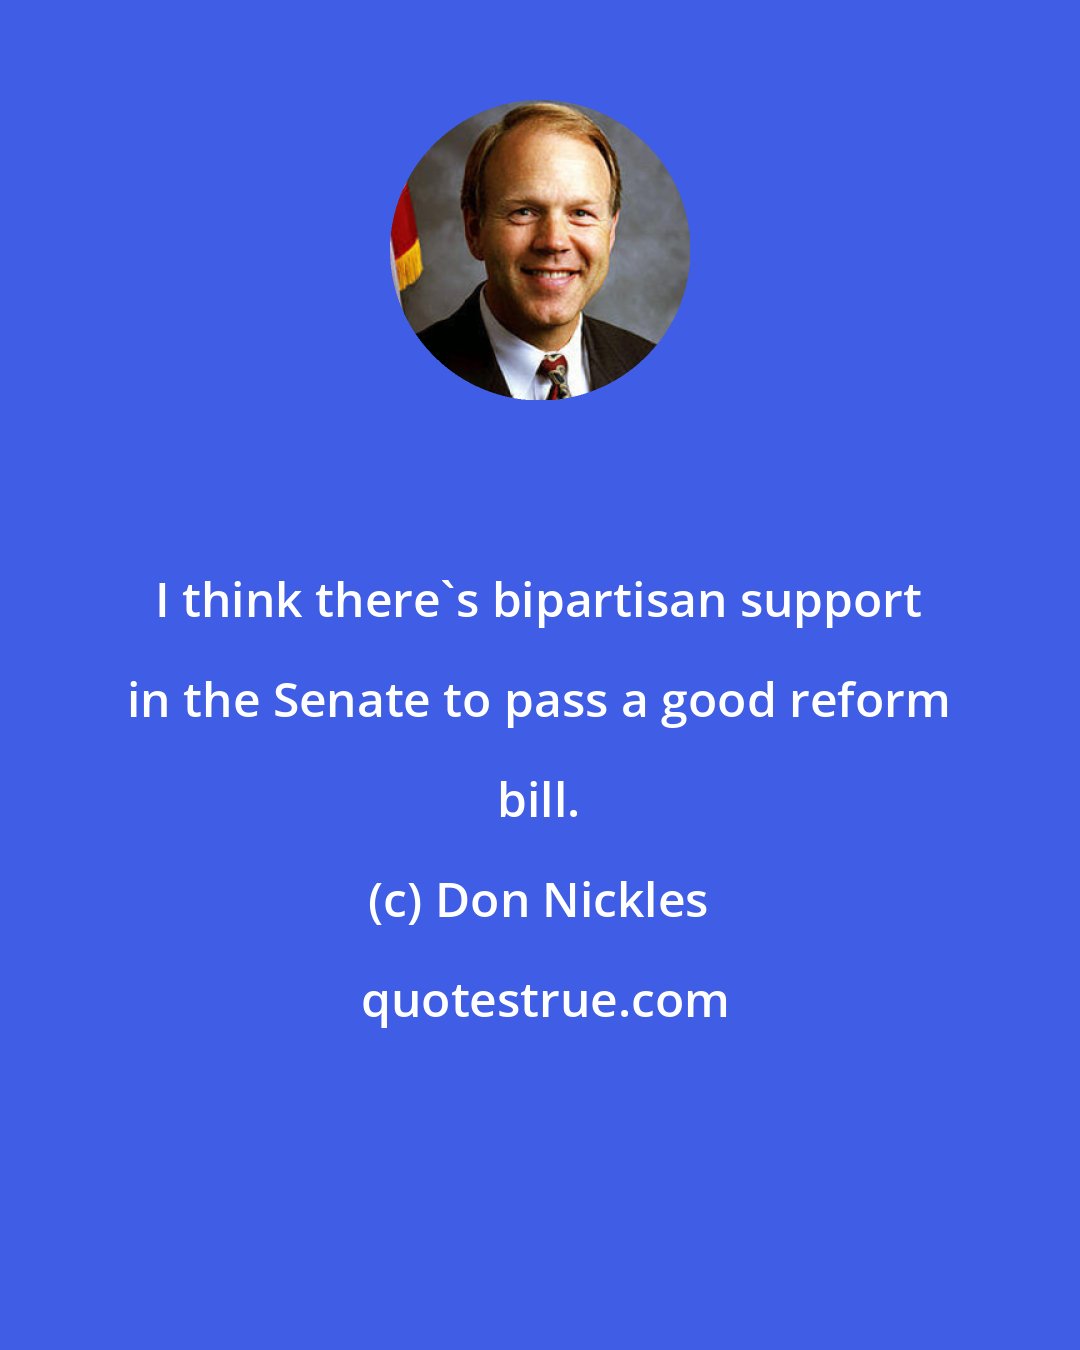 Don Nickles: I think there's bipartisan support in the Senate to pass a good reform bill.